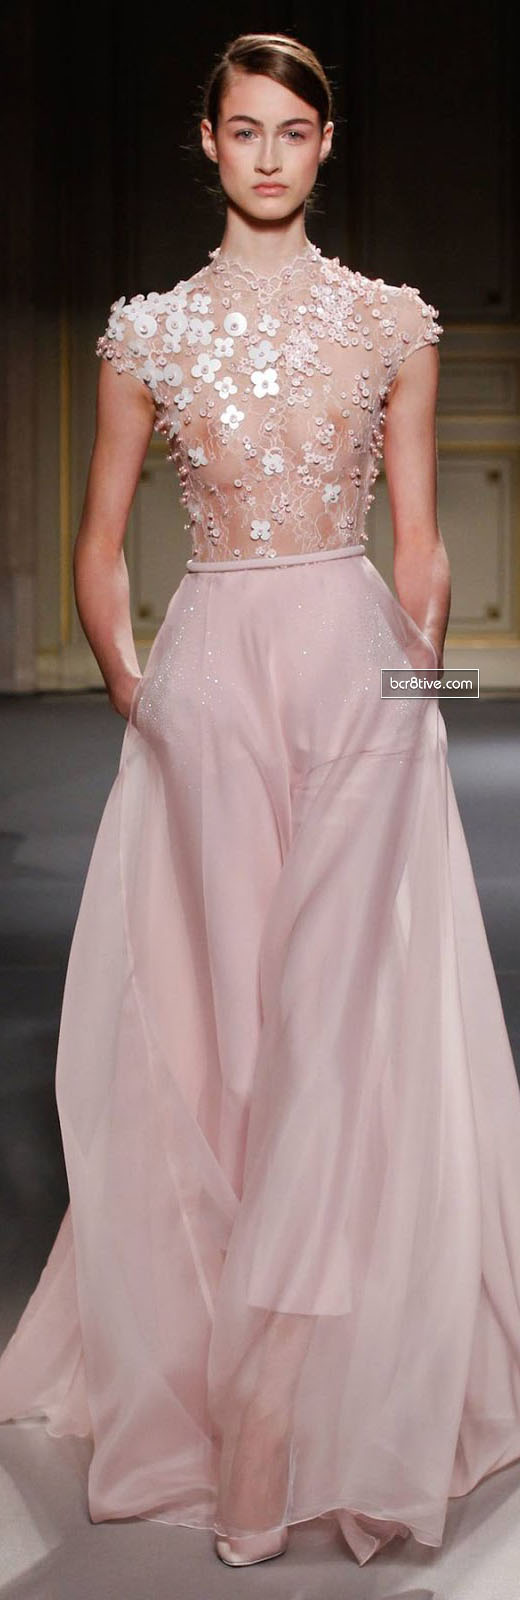 Georges Hobeika Couture Collection Spring 2013